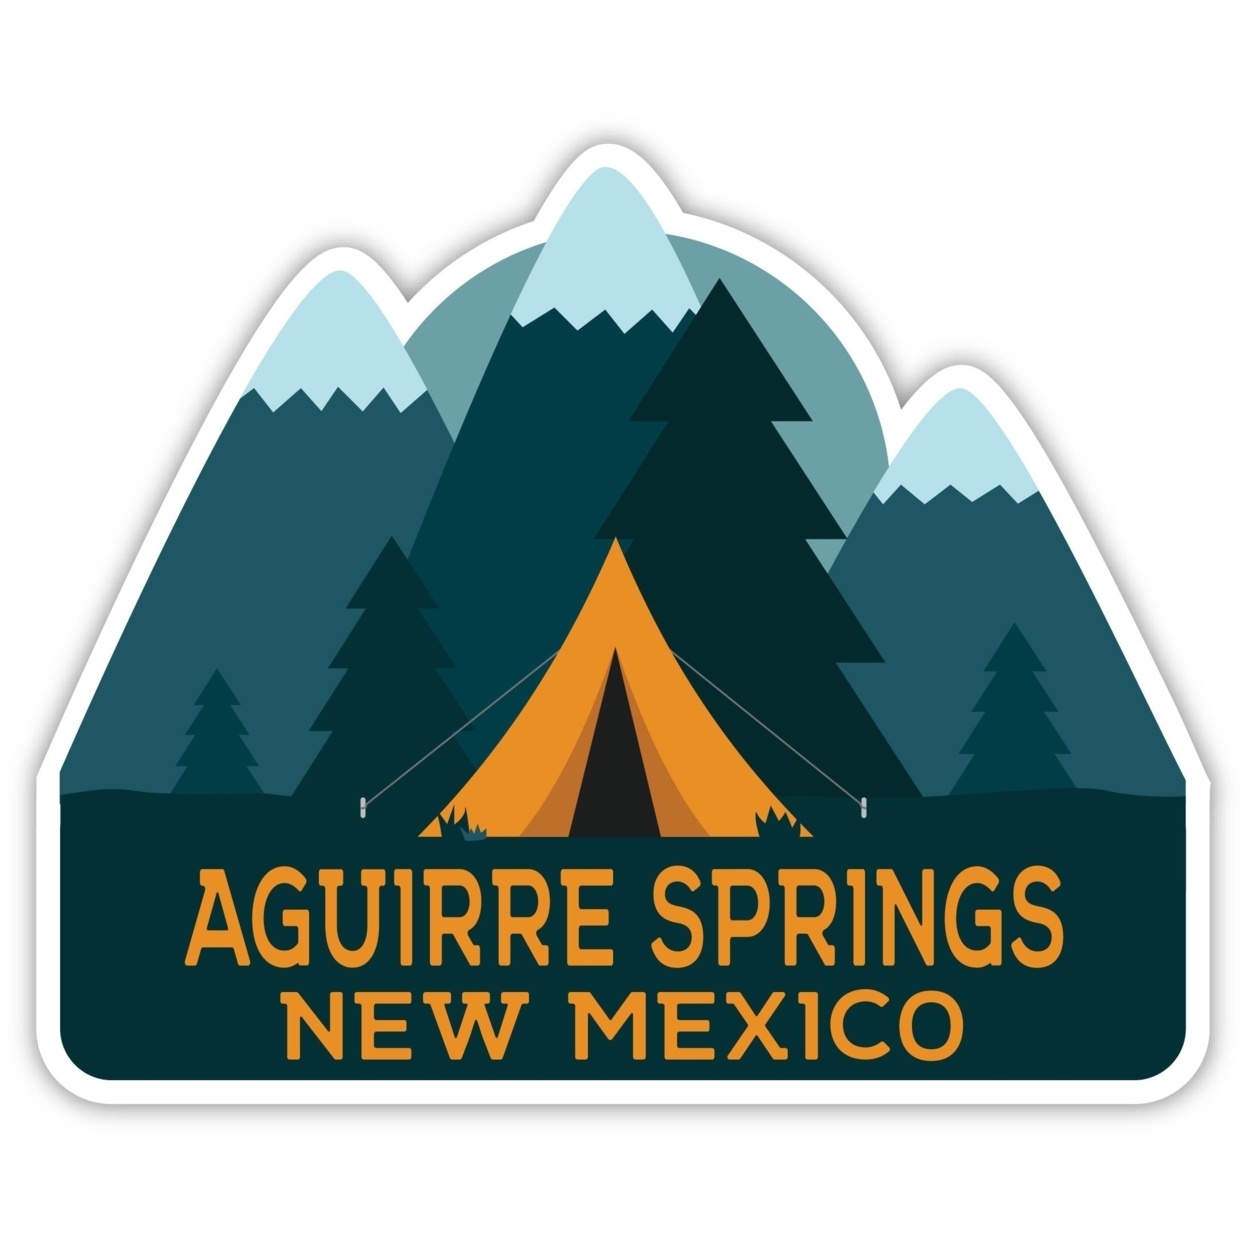 Aguirre Springs New Mexico Souvenir Decorative Stickers (Choose Theme And Size) - 4-Pack, 12-Inch, Tent